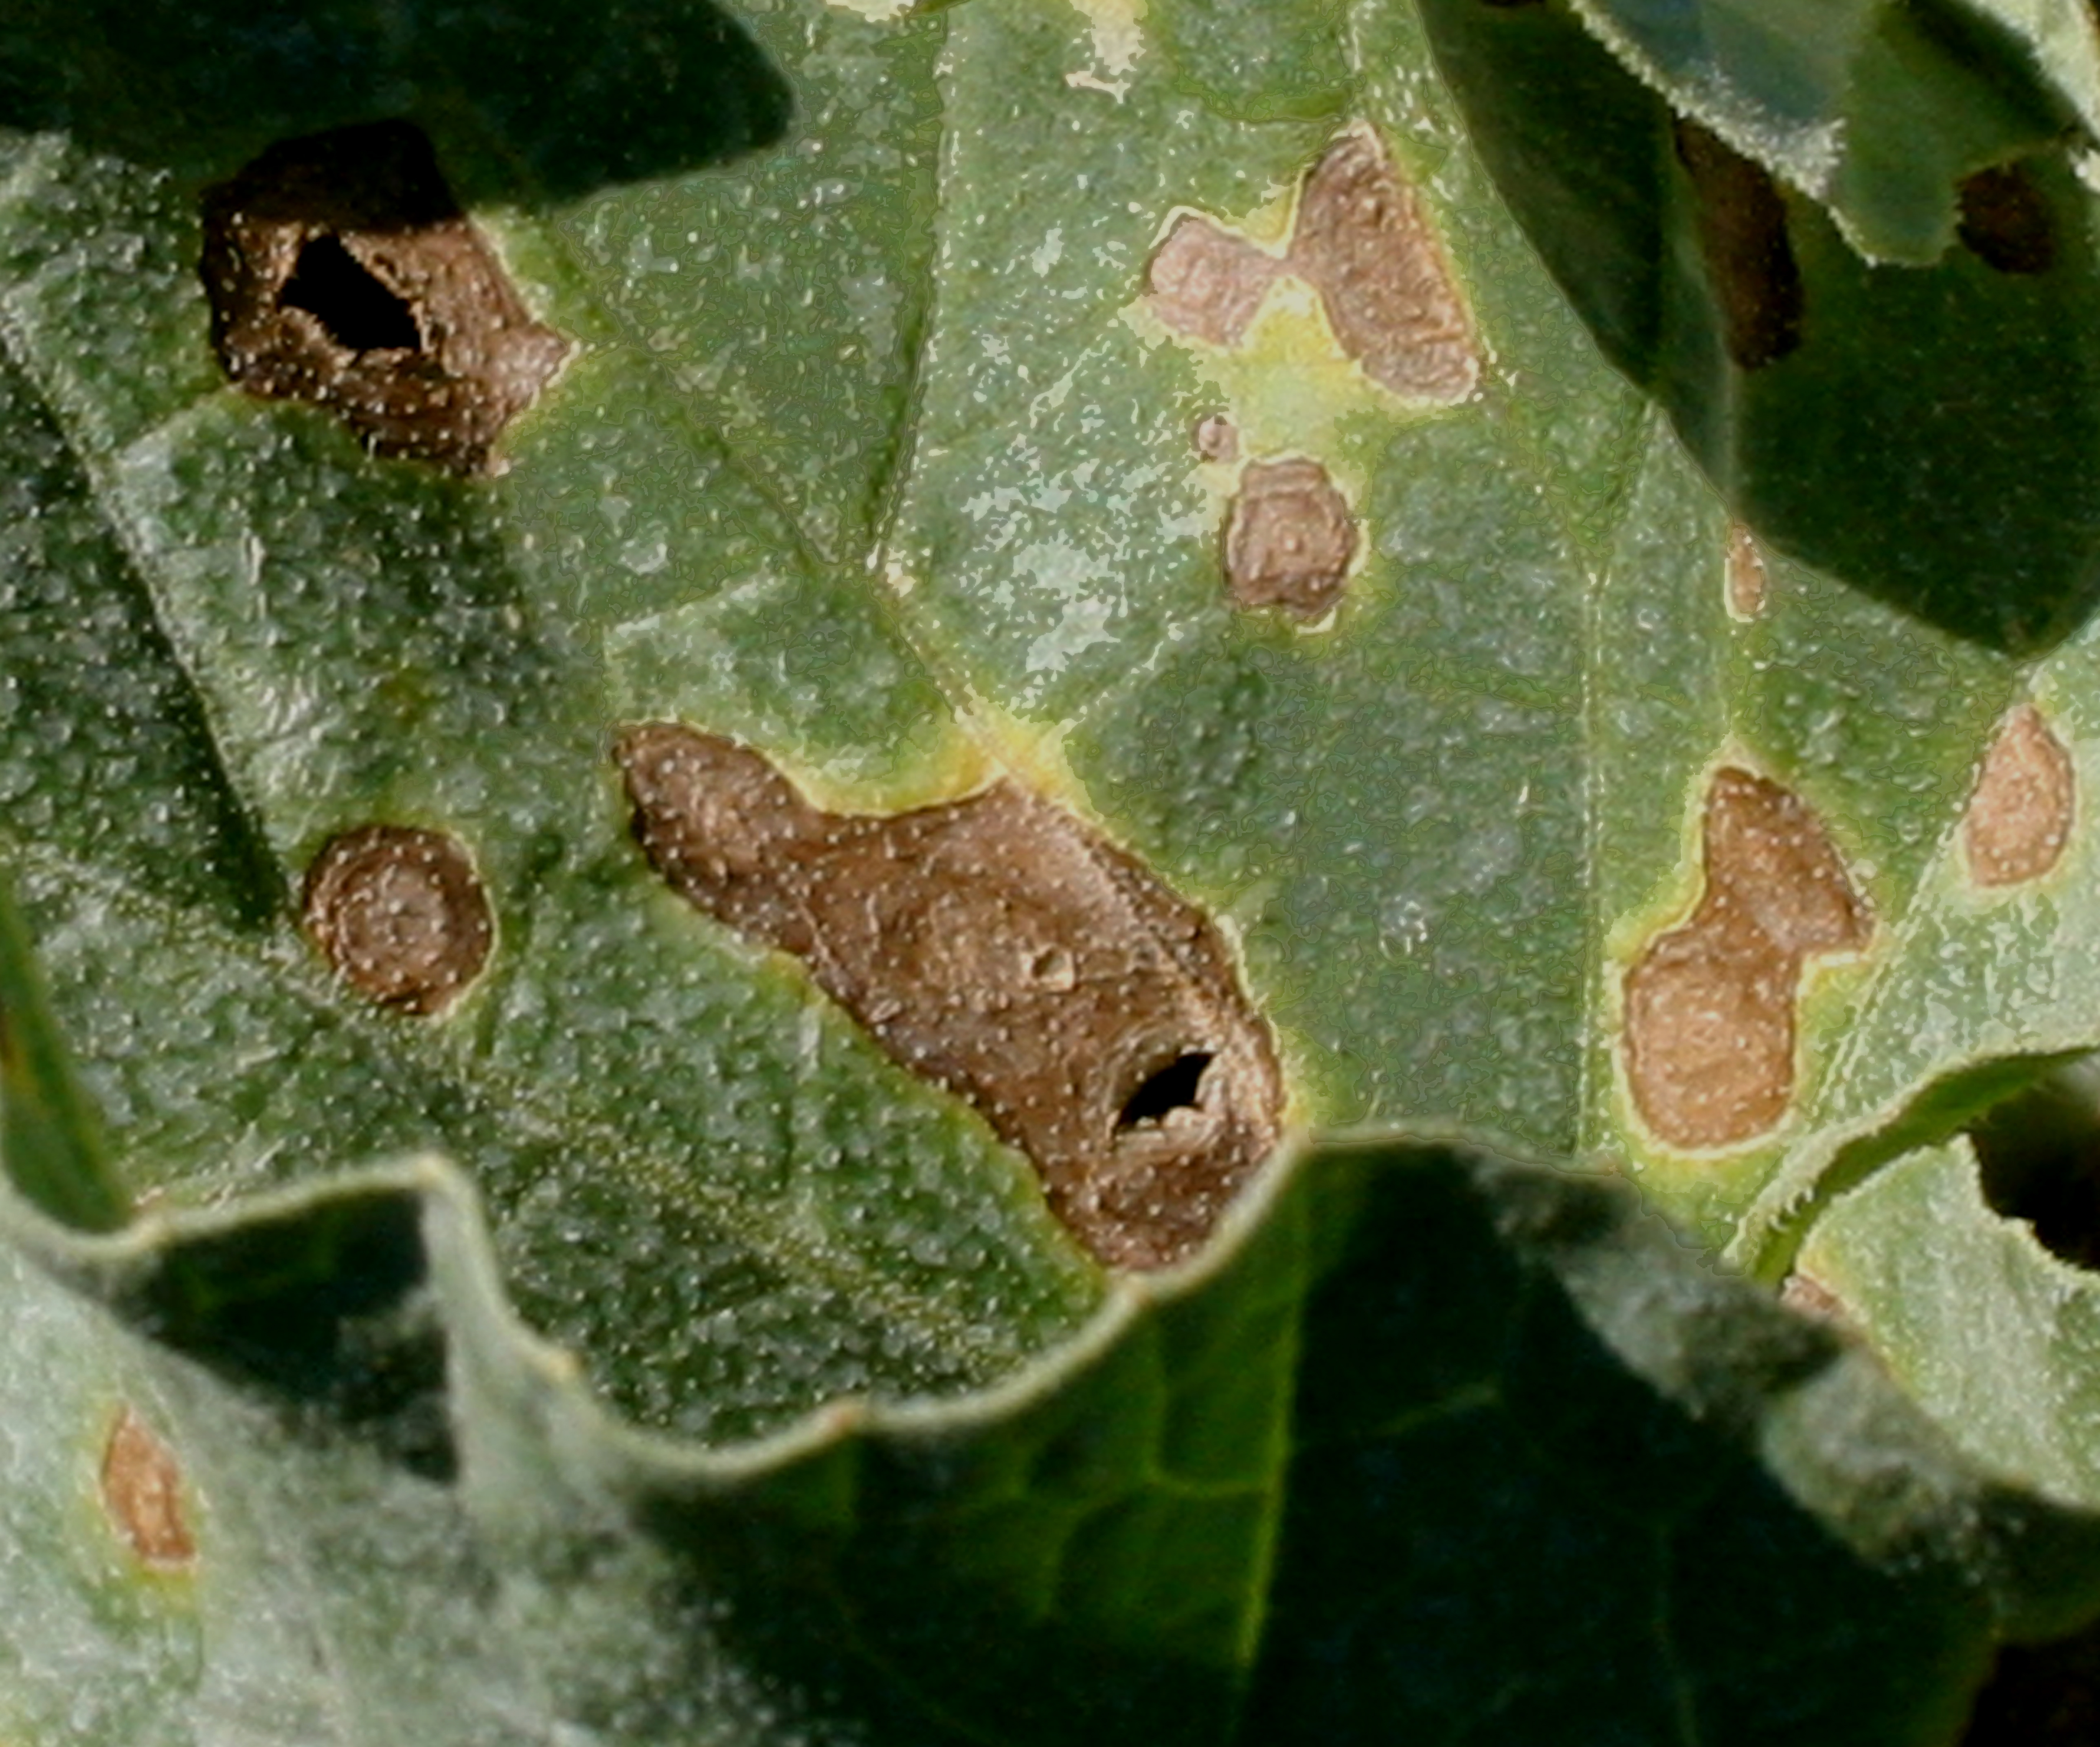 Close-up of Alternaria leaf blight lesions.